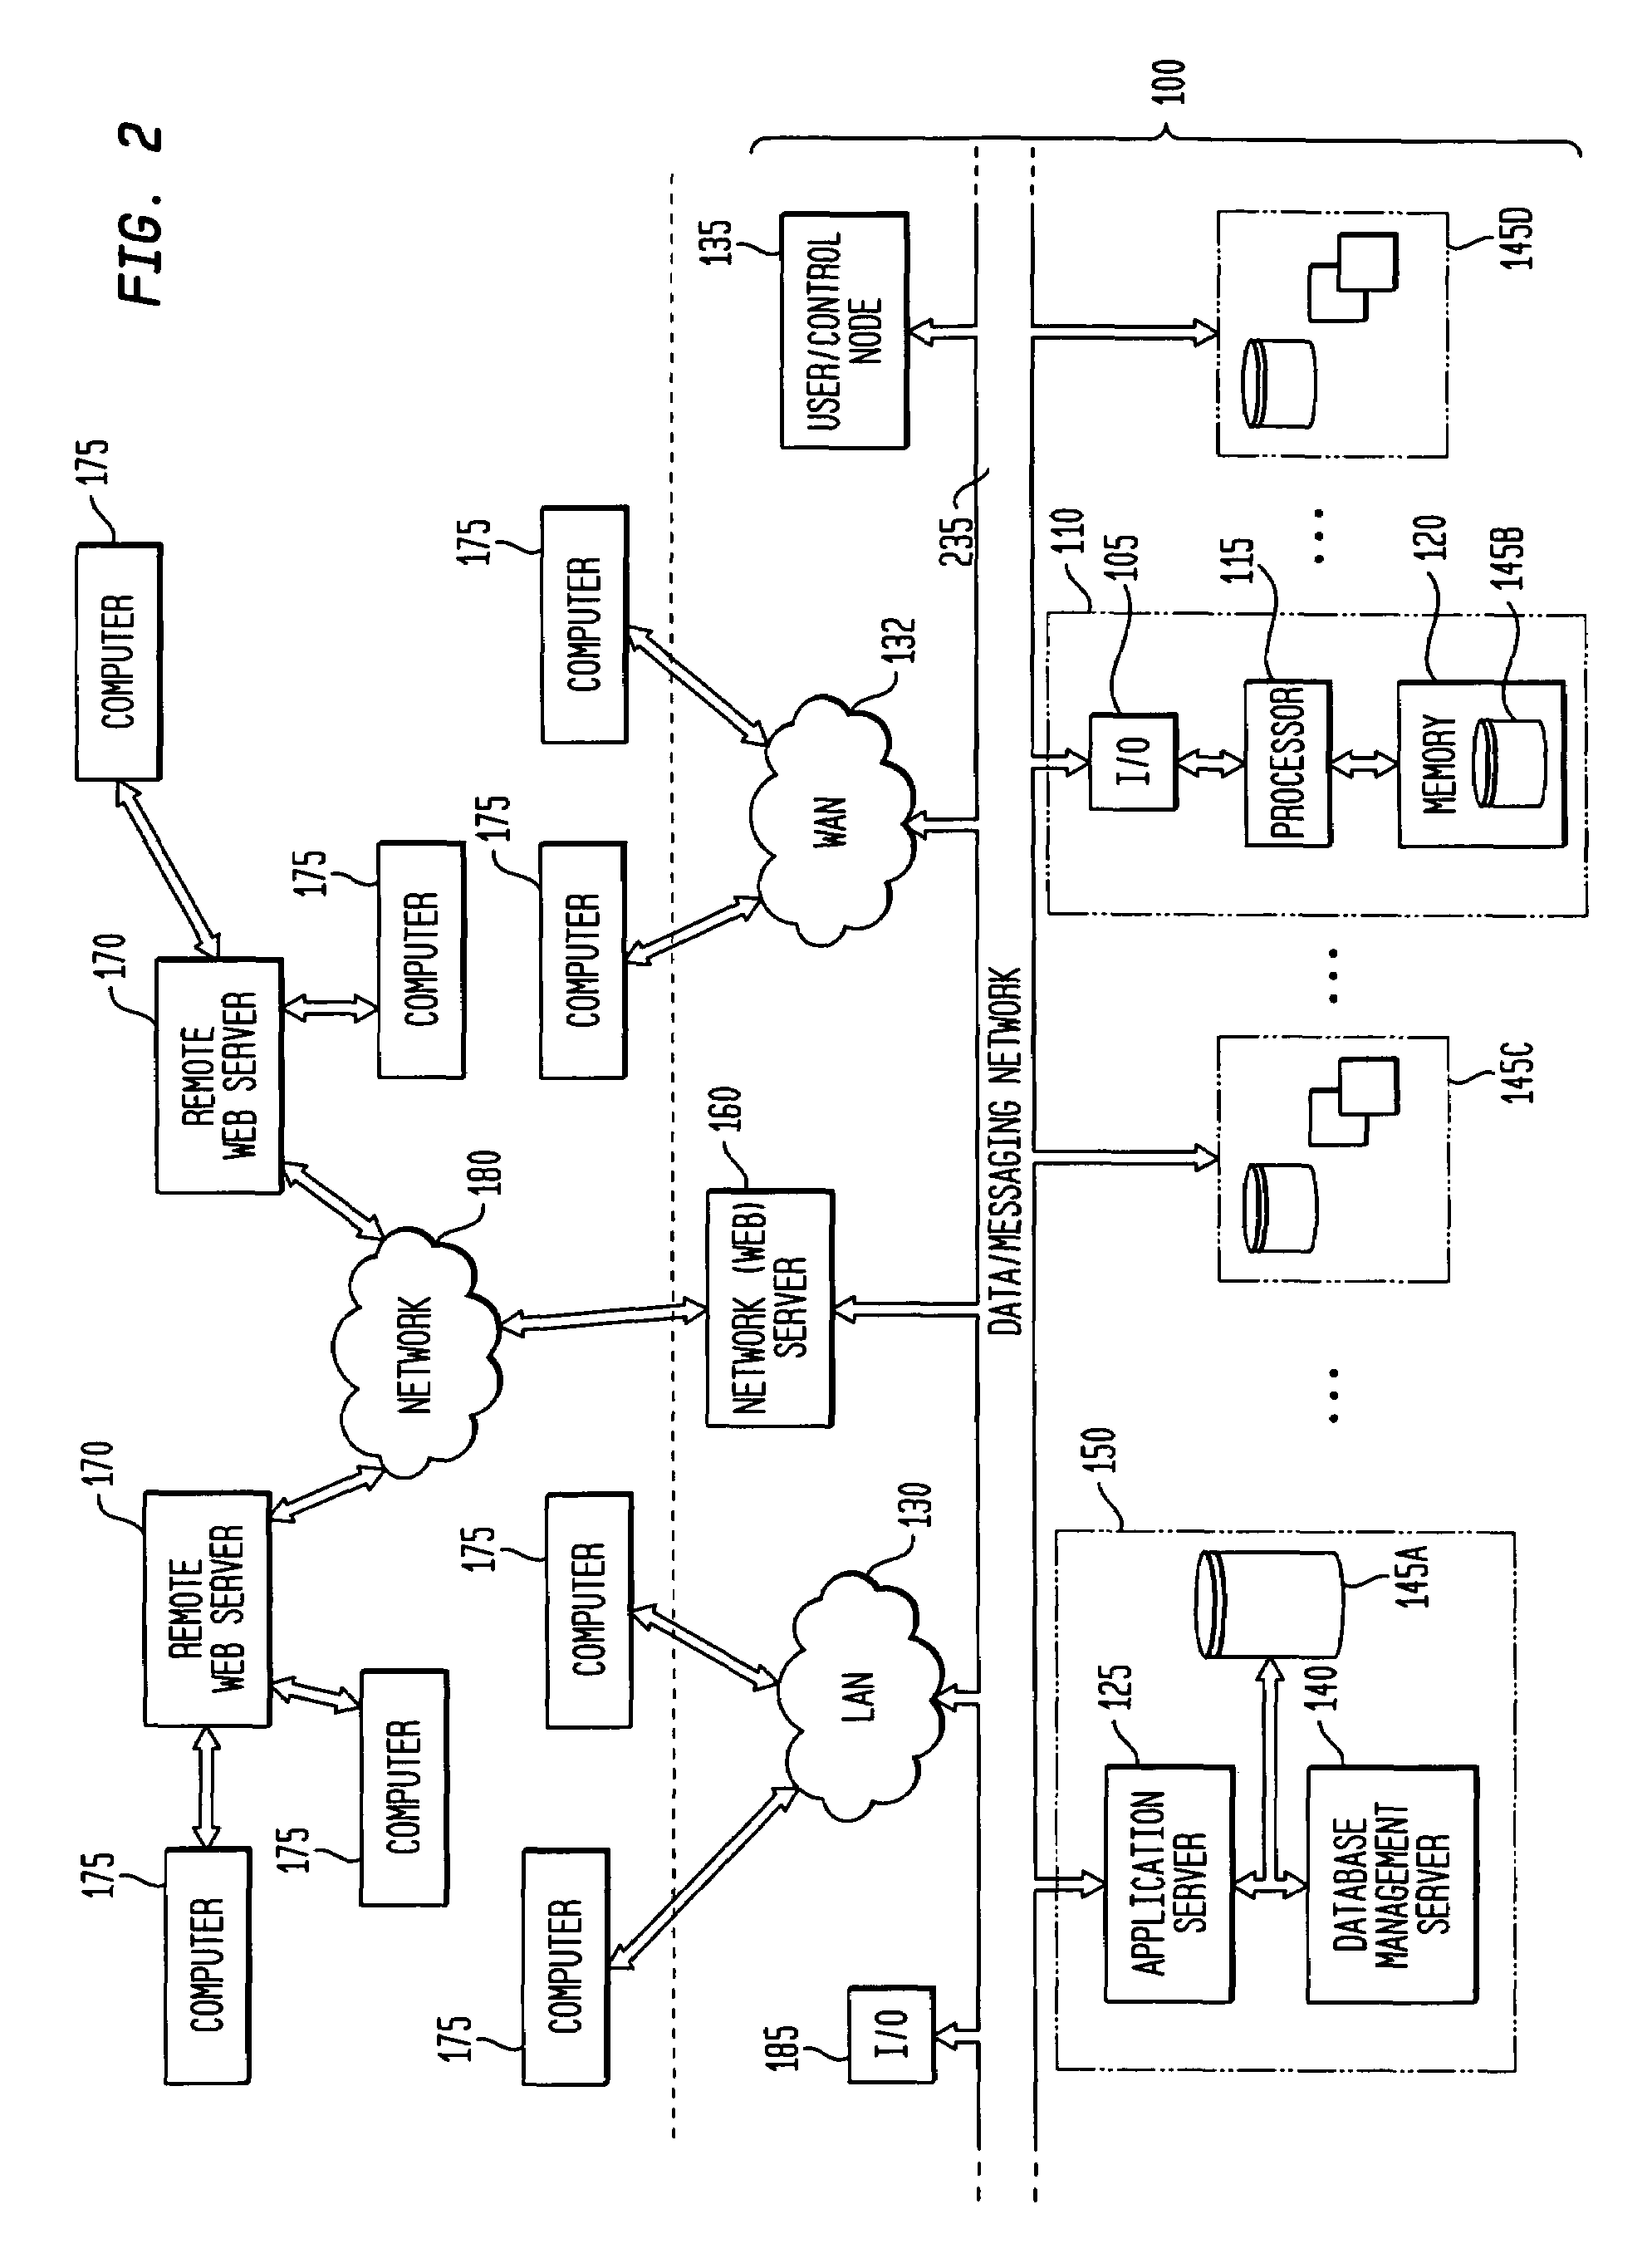 Software and metadata structures for distributed and interactive database architecture for parallel and asynchronous data processing of complex data and for real-time query processing